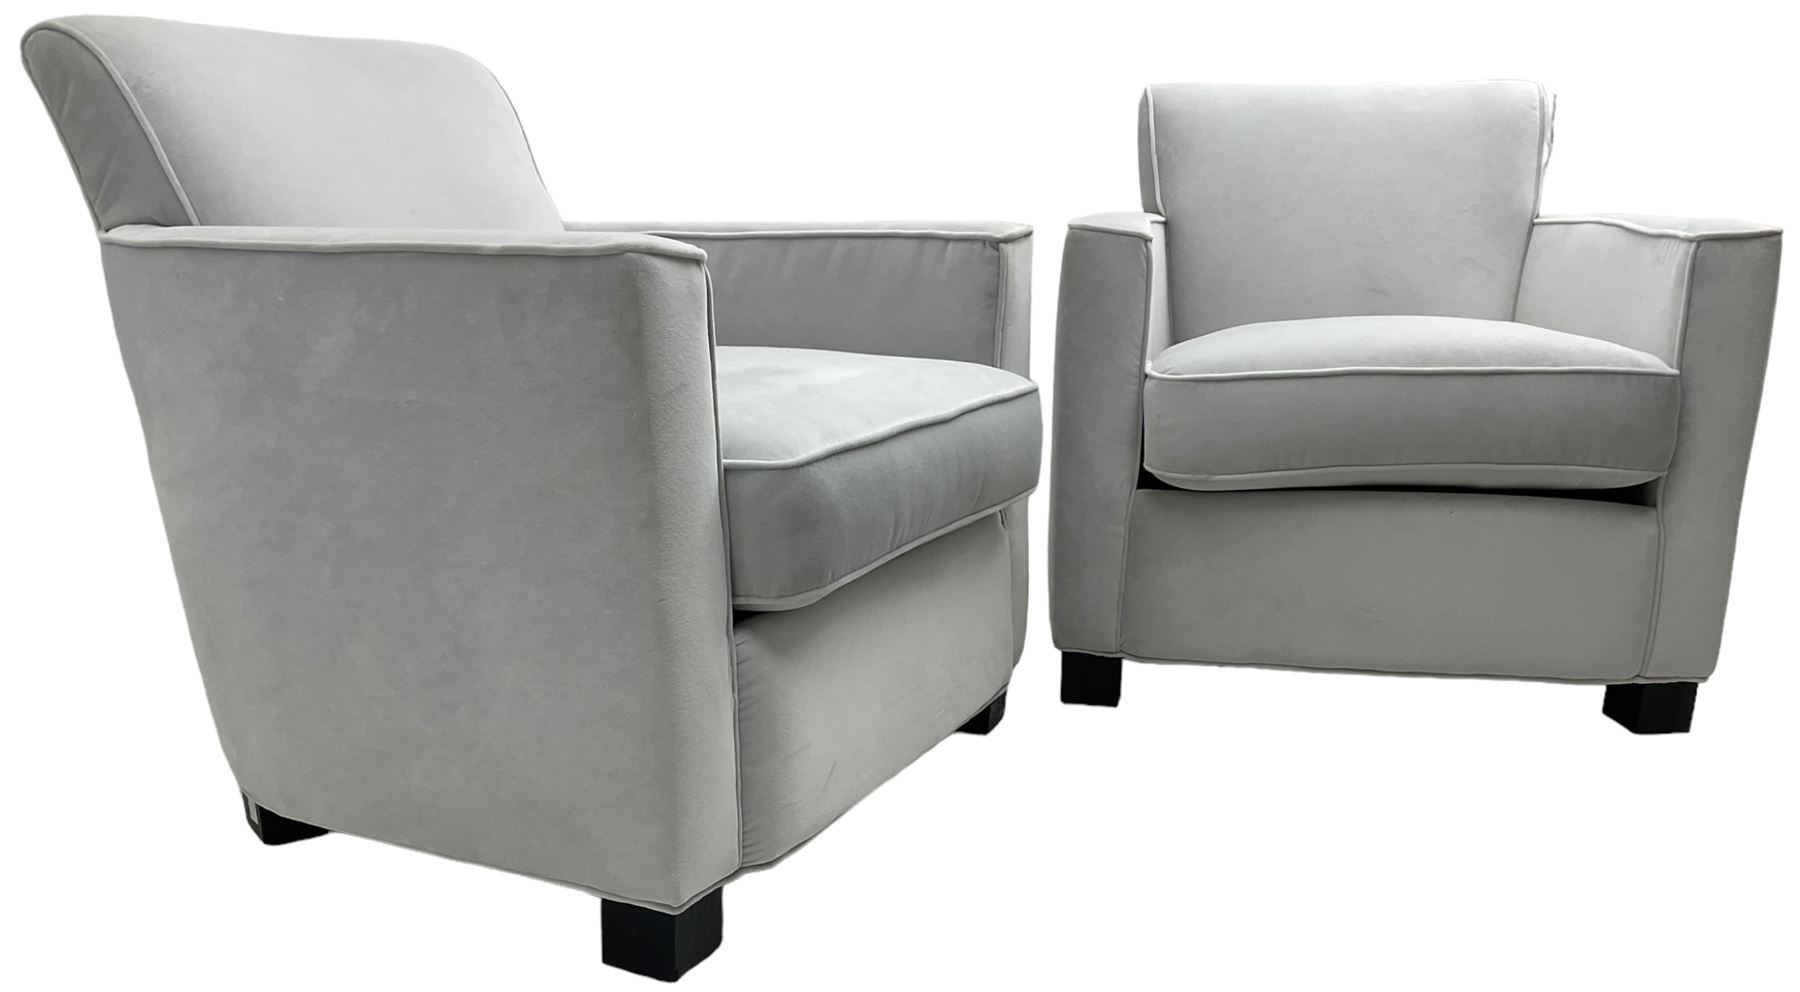 India Jane Interiors - 'Savoy' pair of contemporary armchairs upholstered in light grey velvet fabri - Image 4 of 7